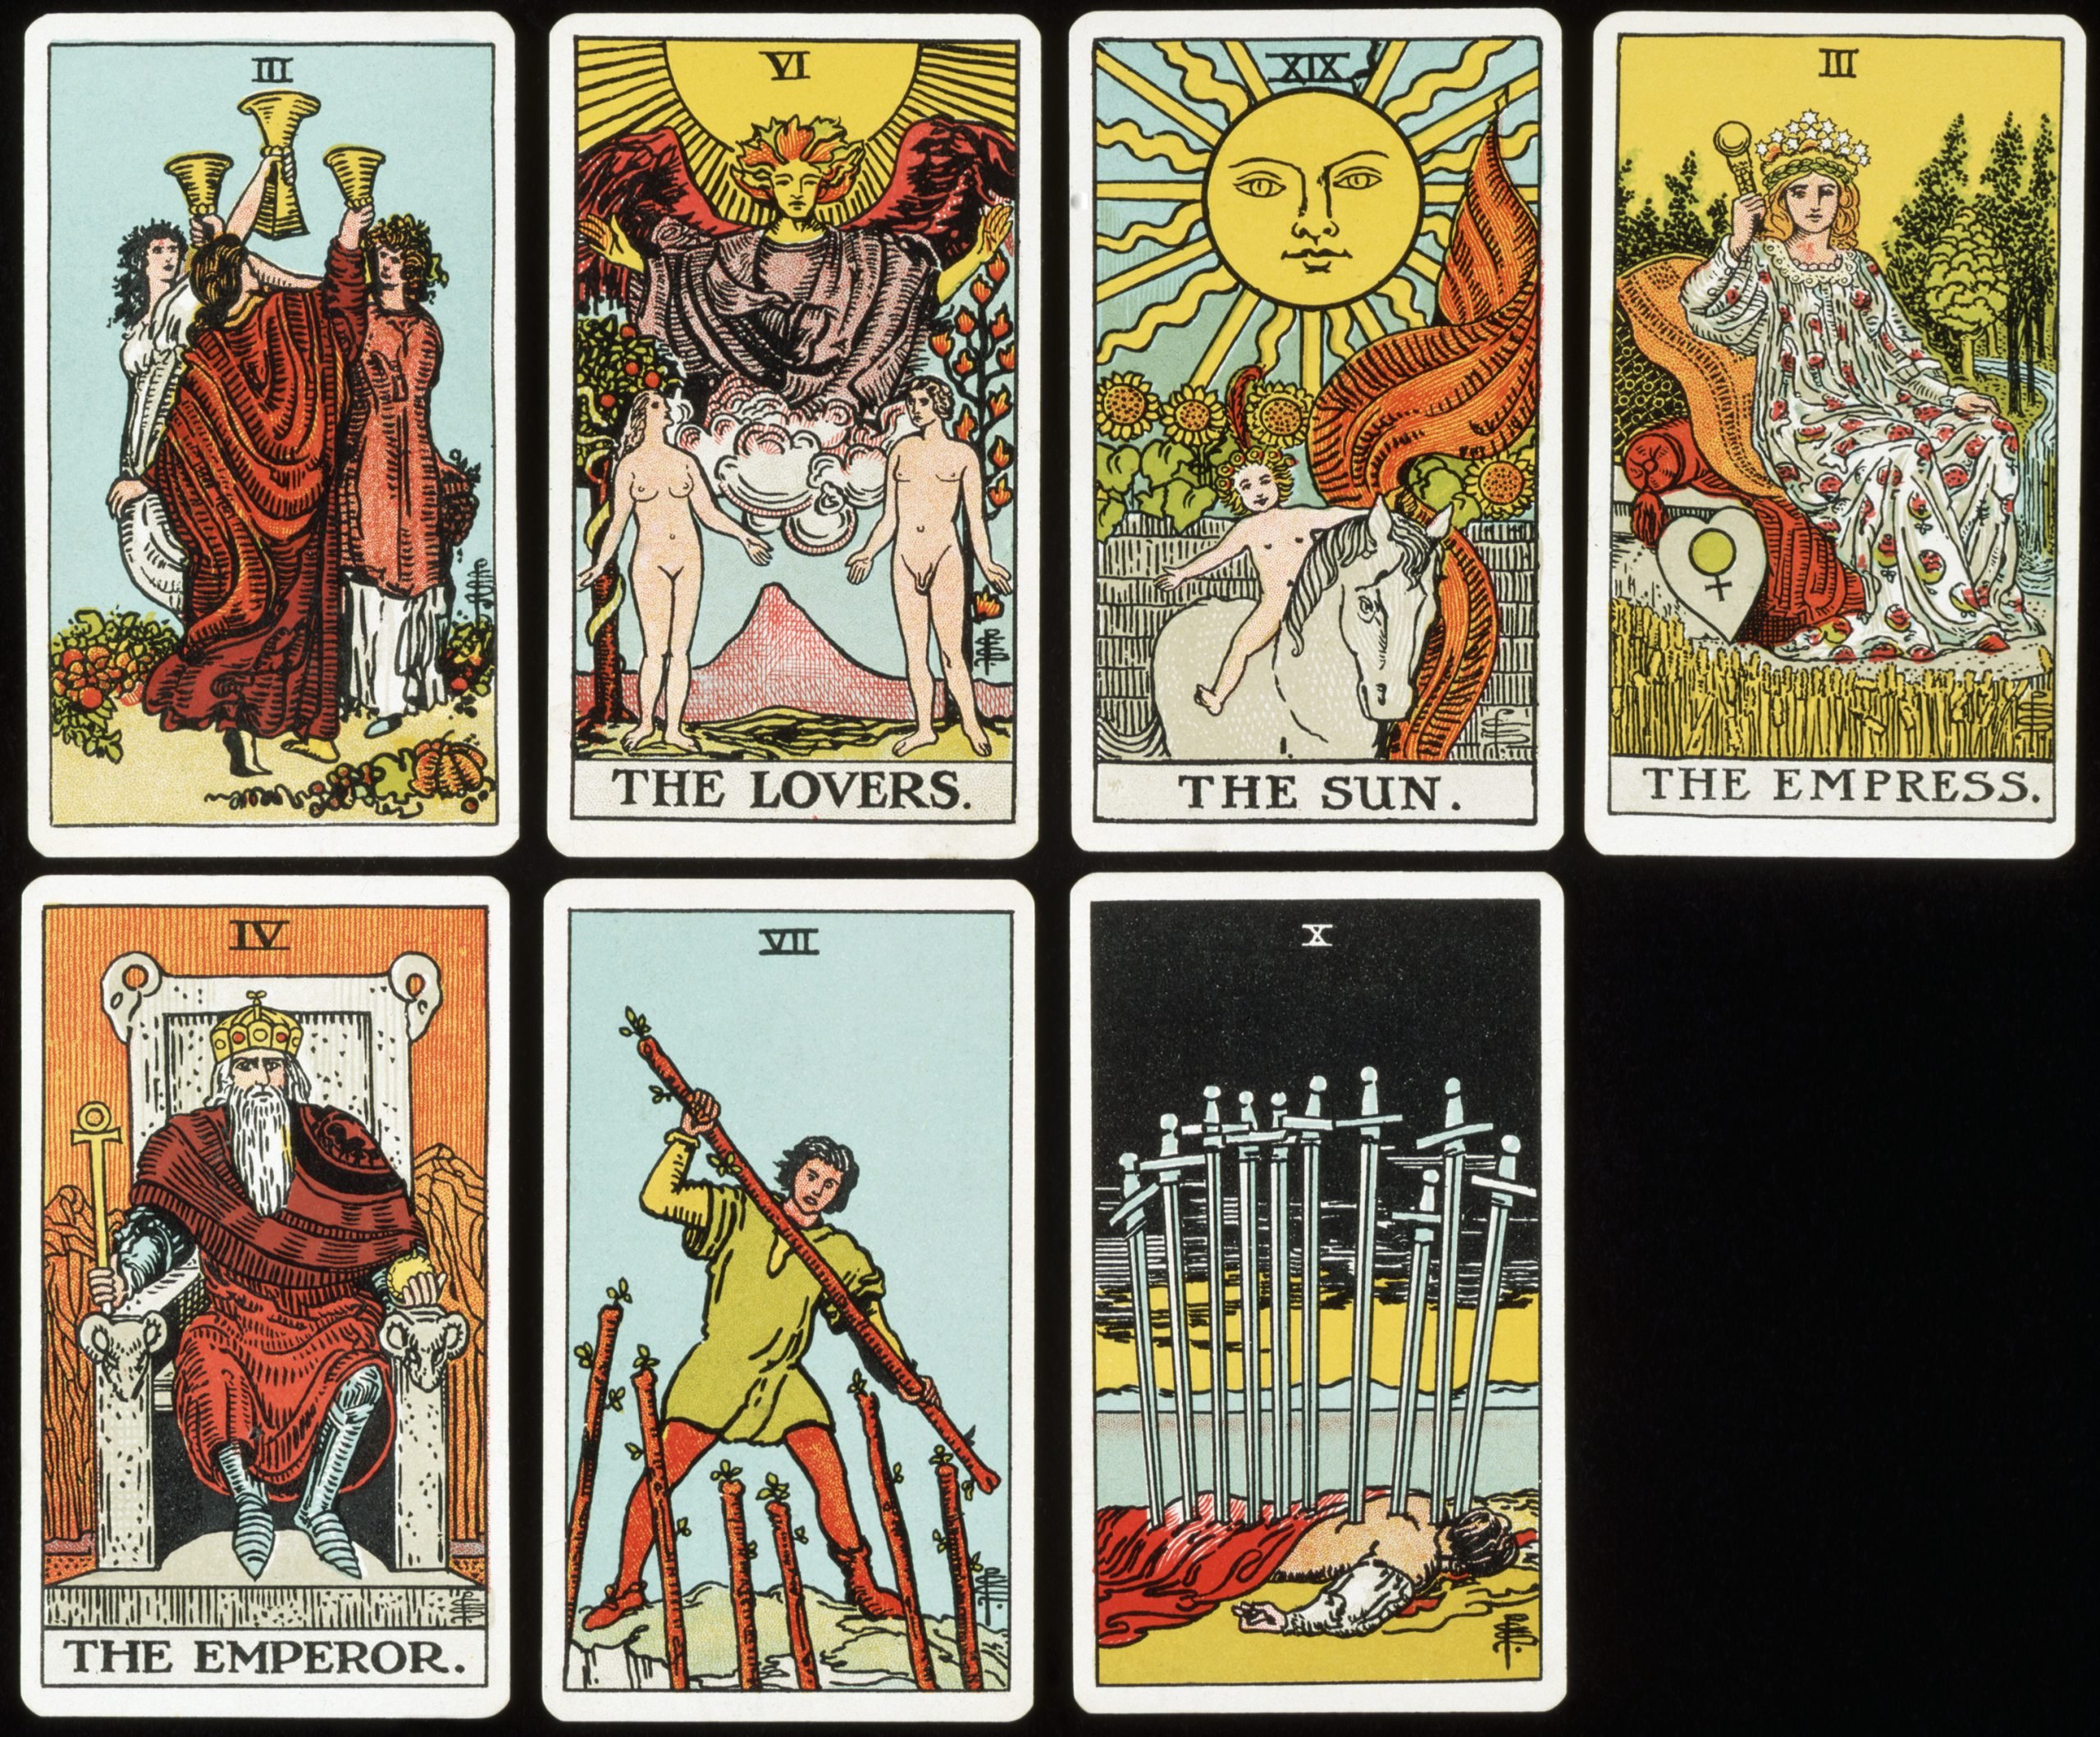 Velkommen Logisk Hukommelse Pamela Colman Smith Was the Artist and Occultist Who Designed the Iconic Tarot  Deck. Why Has No One Ever Heard Her Name?